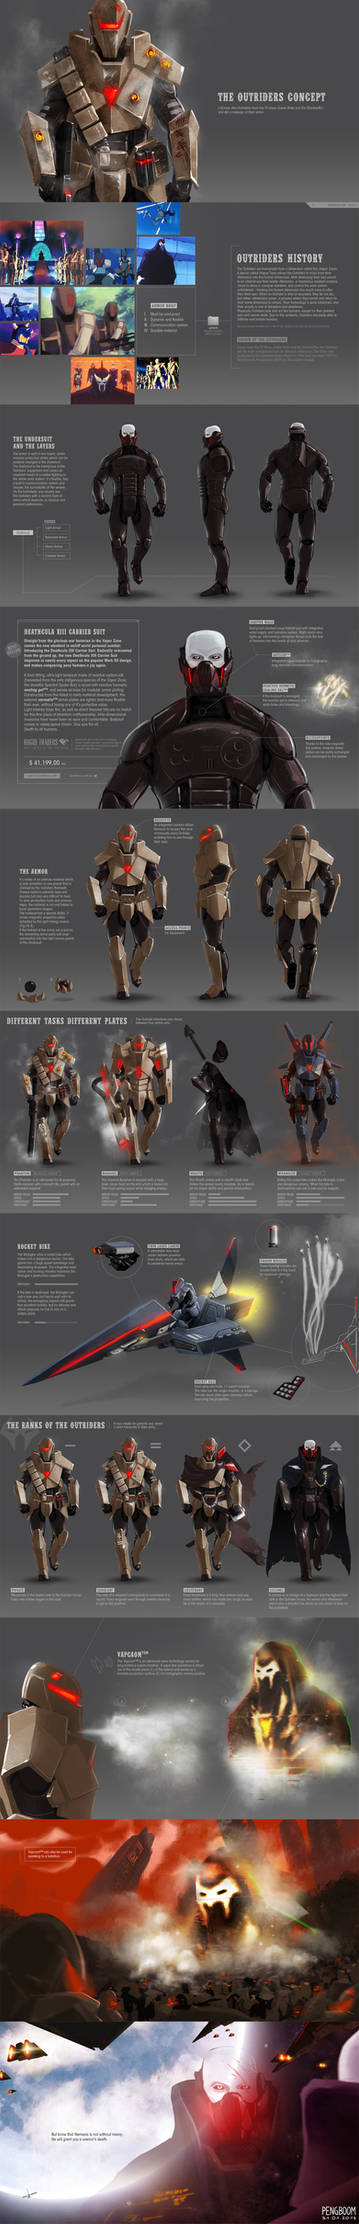 Outriders Concept